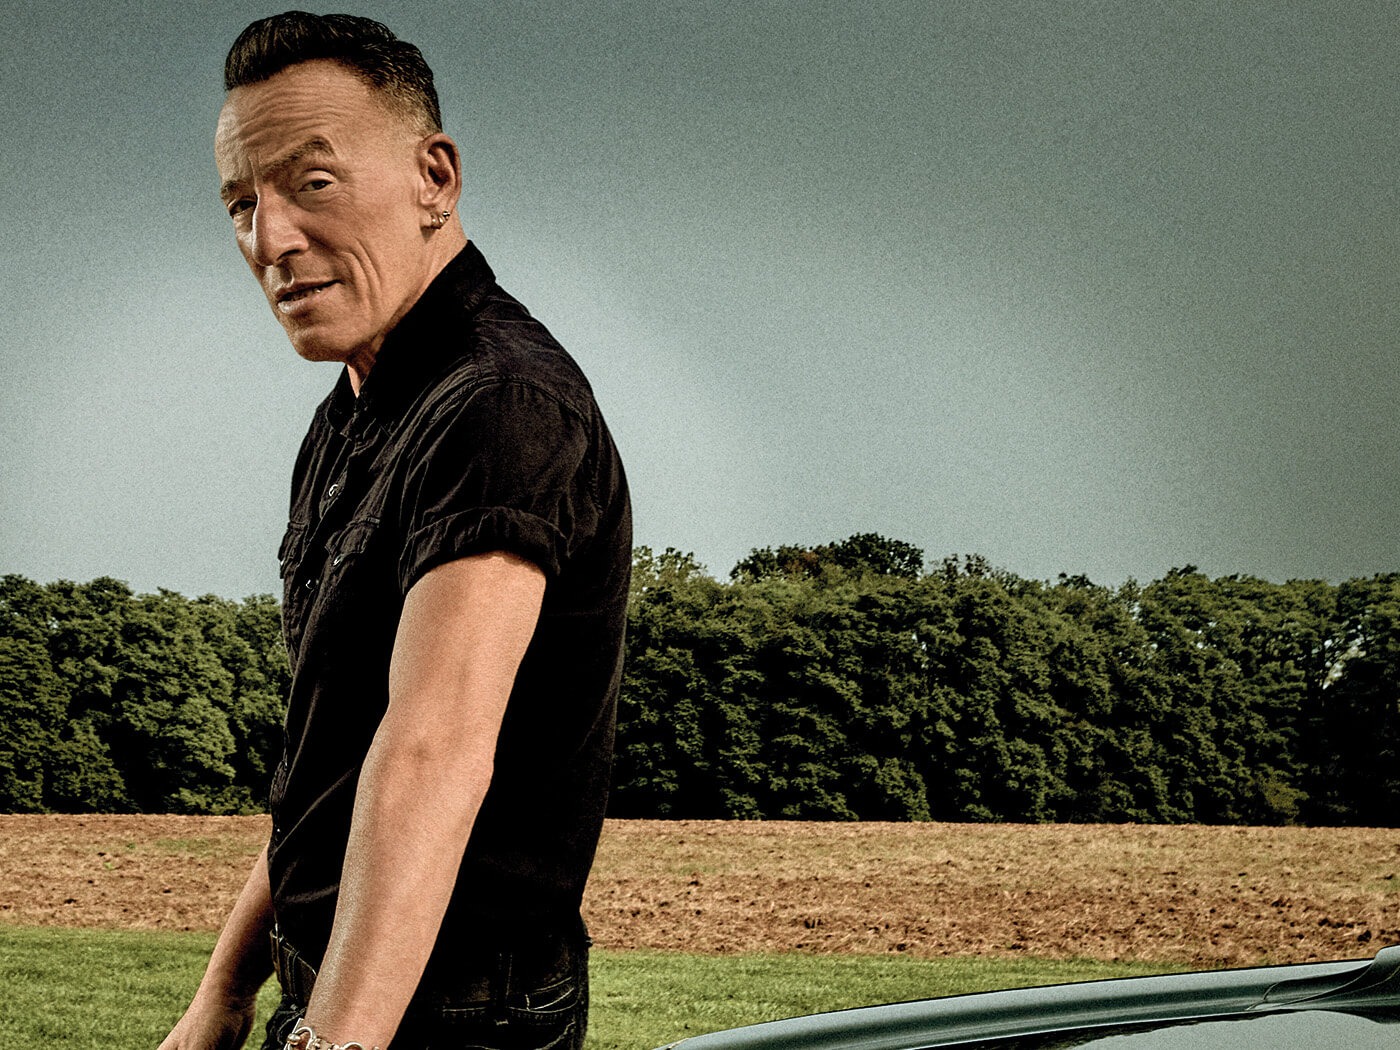 From 'Born to Run' to 'Letter to You' The Enduring Legacy of Bruce Springsteen (2)